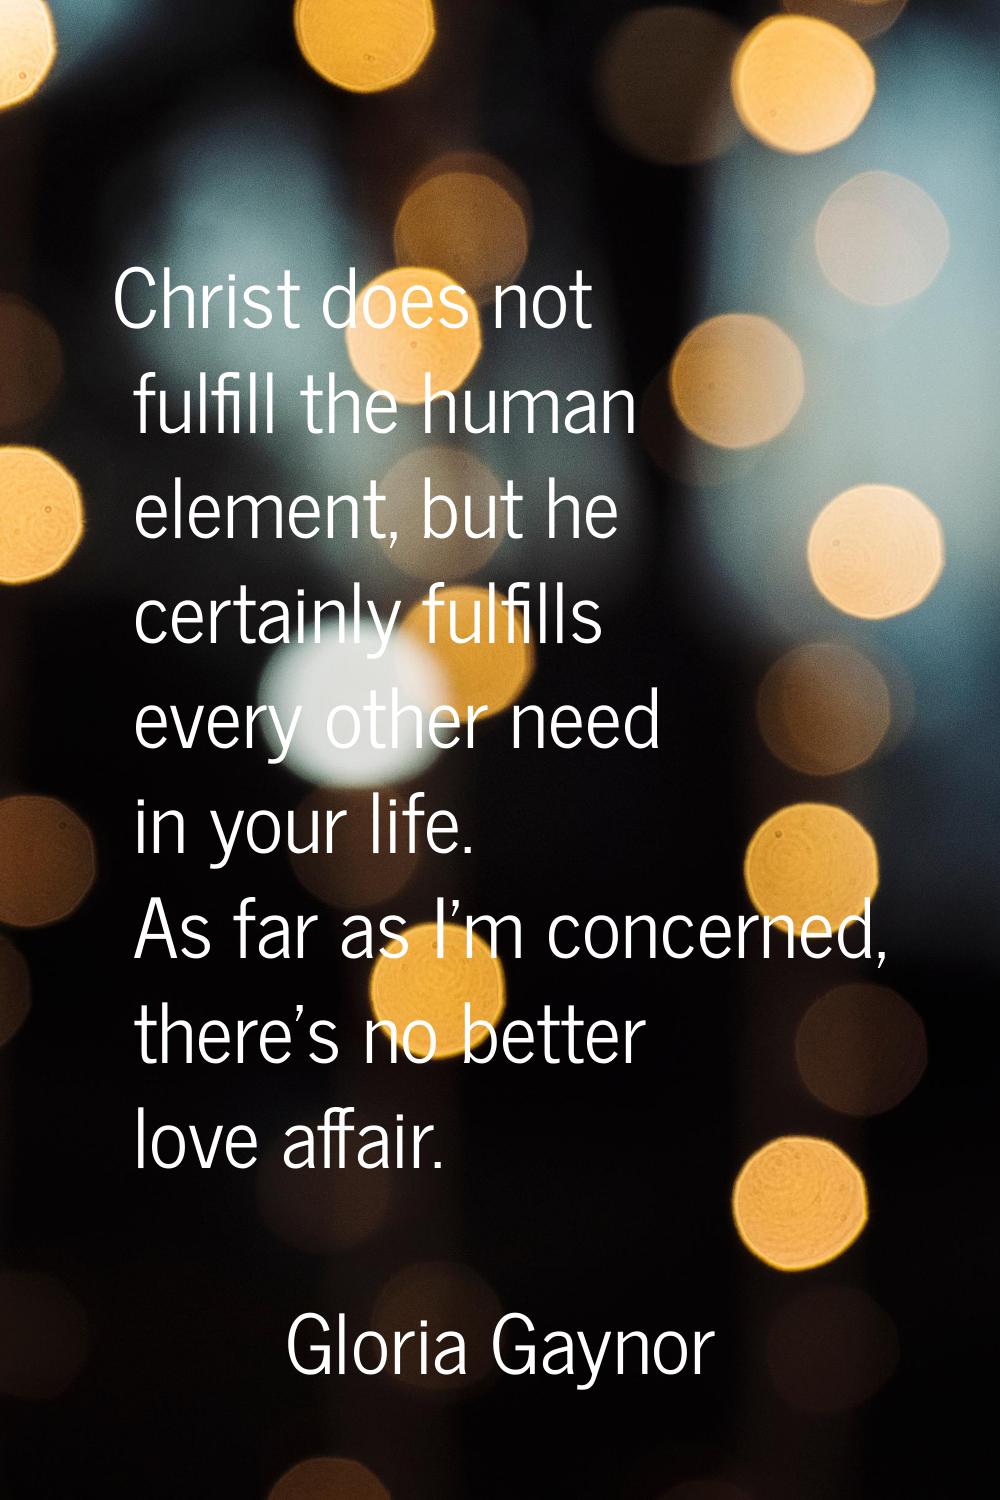 Christ does not fulfill the human element, but he certainly fulfills every other need in your life.